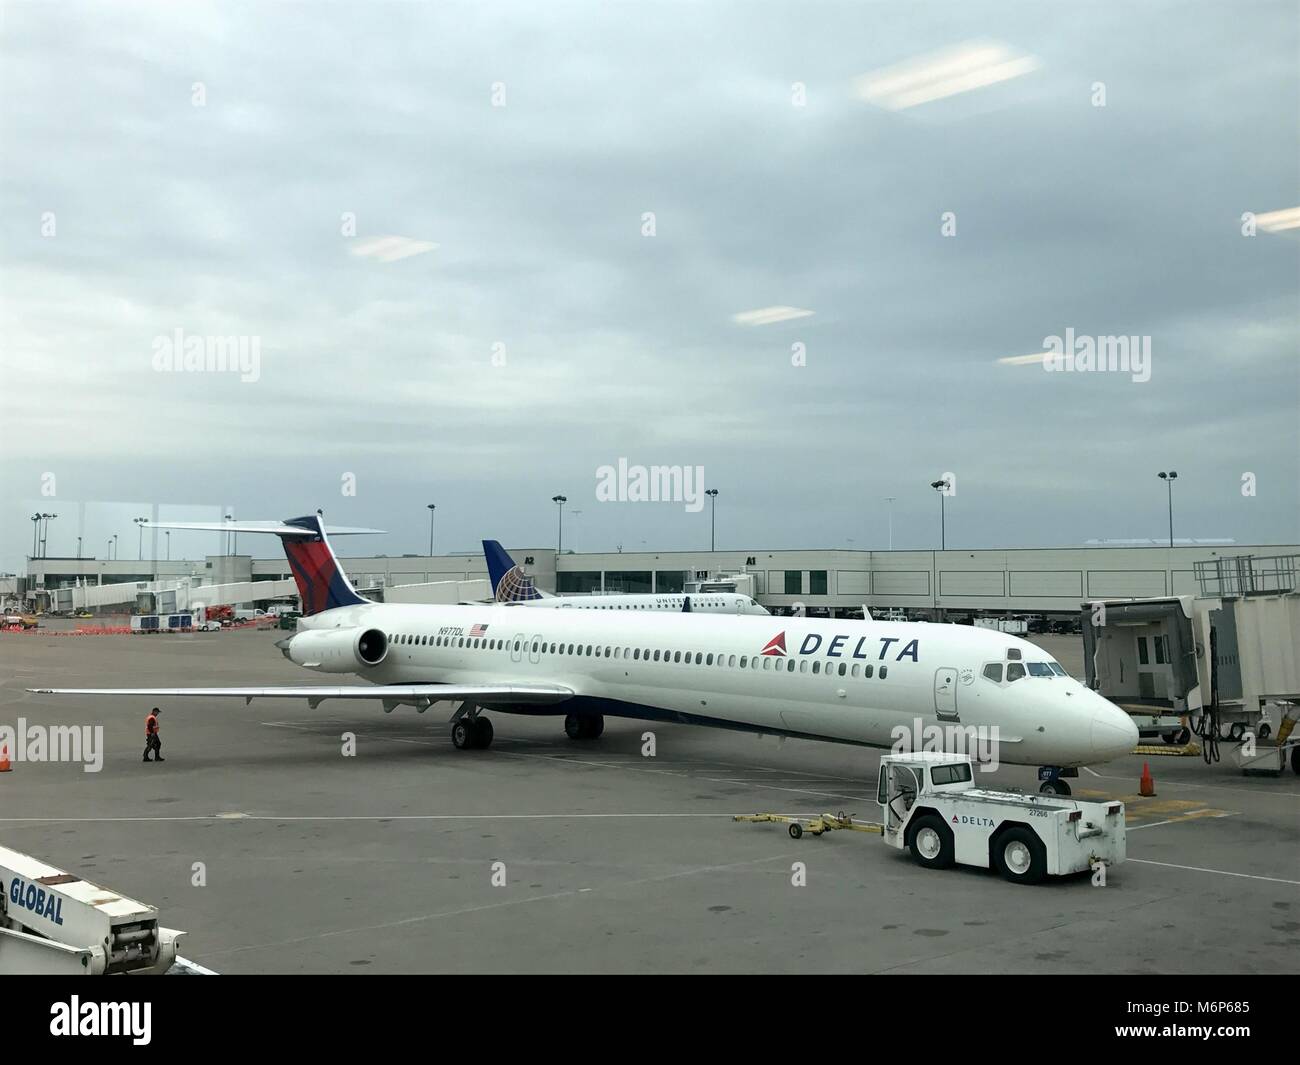 Nashville Tennessee - Circa 2017: Delta airlines McDonnell Douglas MD-90 airplane at terminal gate waiting for passengers to board and deport for flig Stock Photo